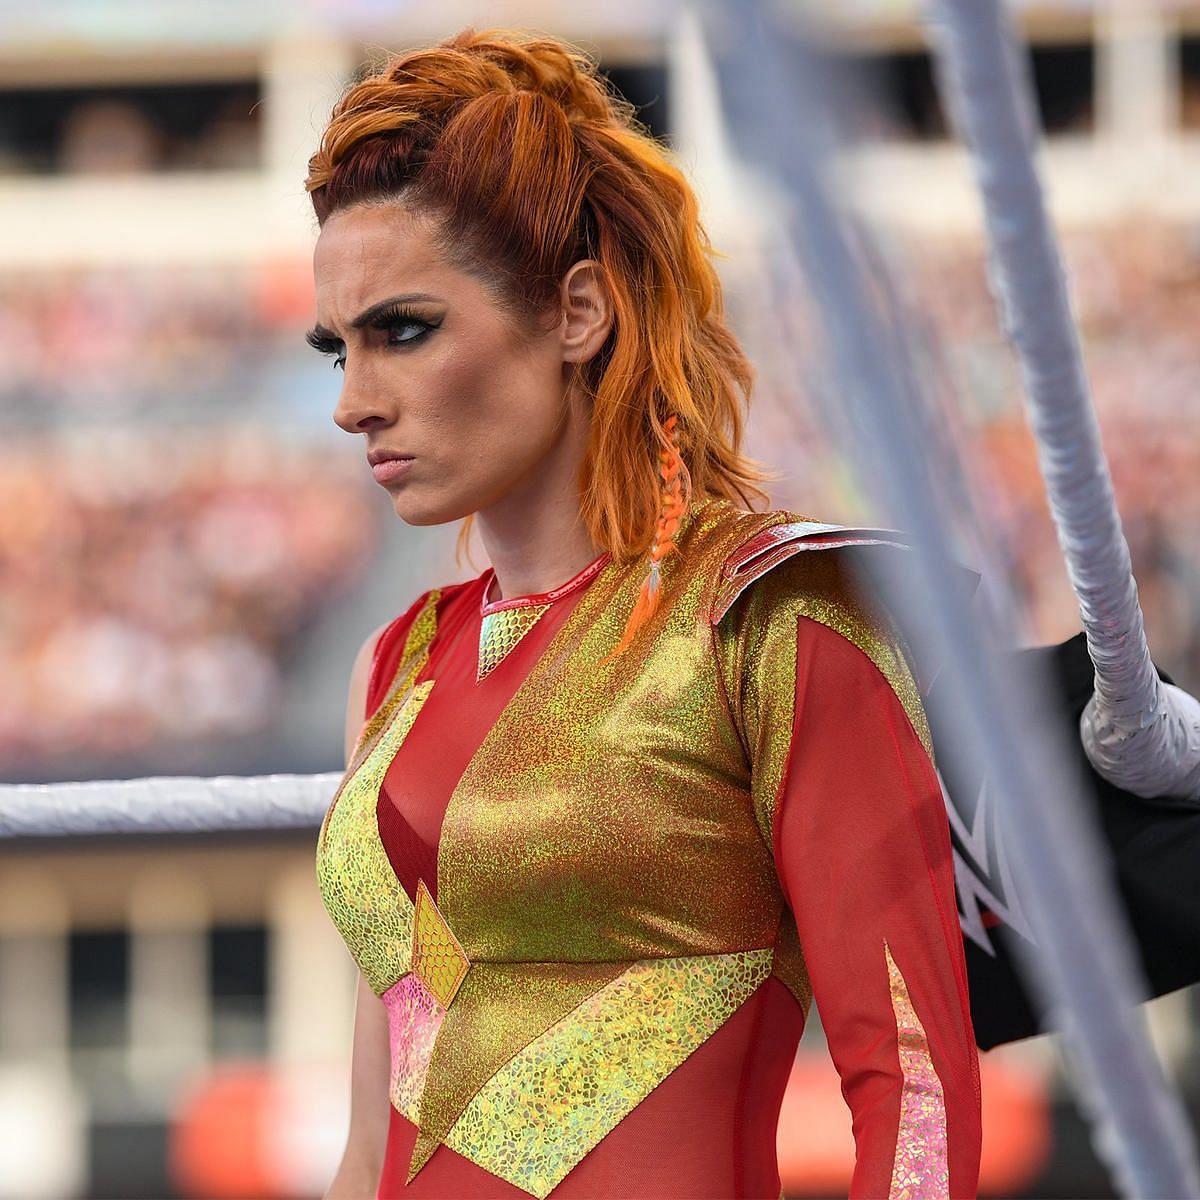 Becky Lynch underwent a major character change last summer.